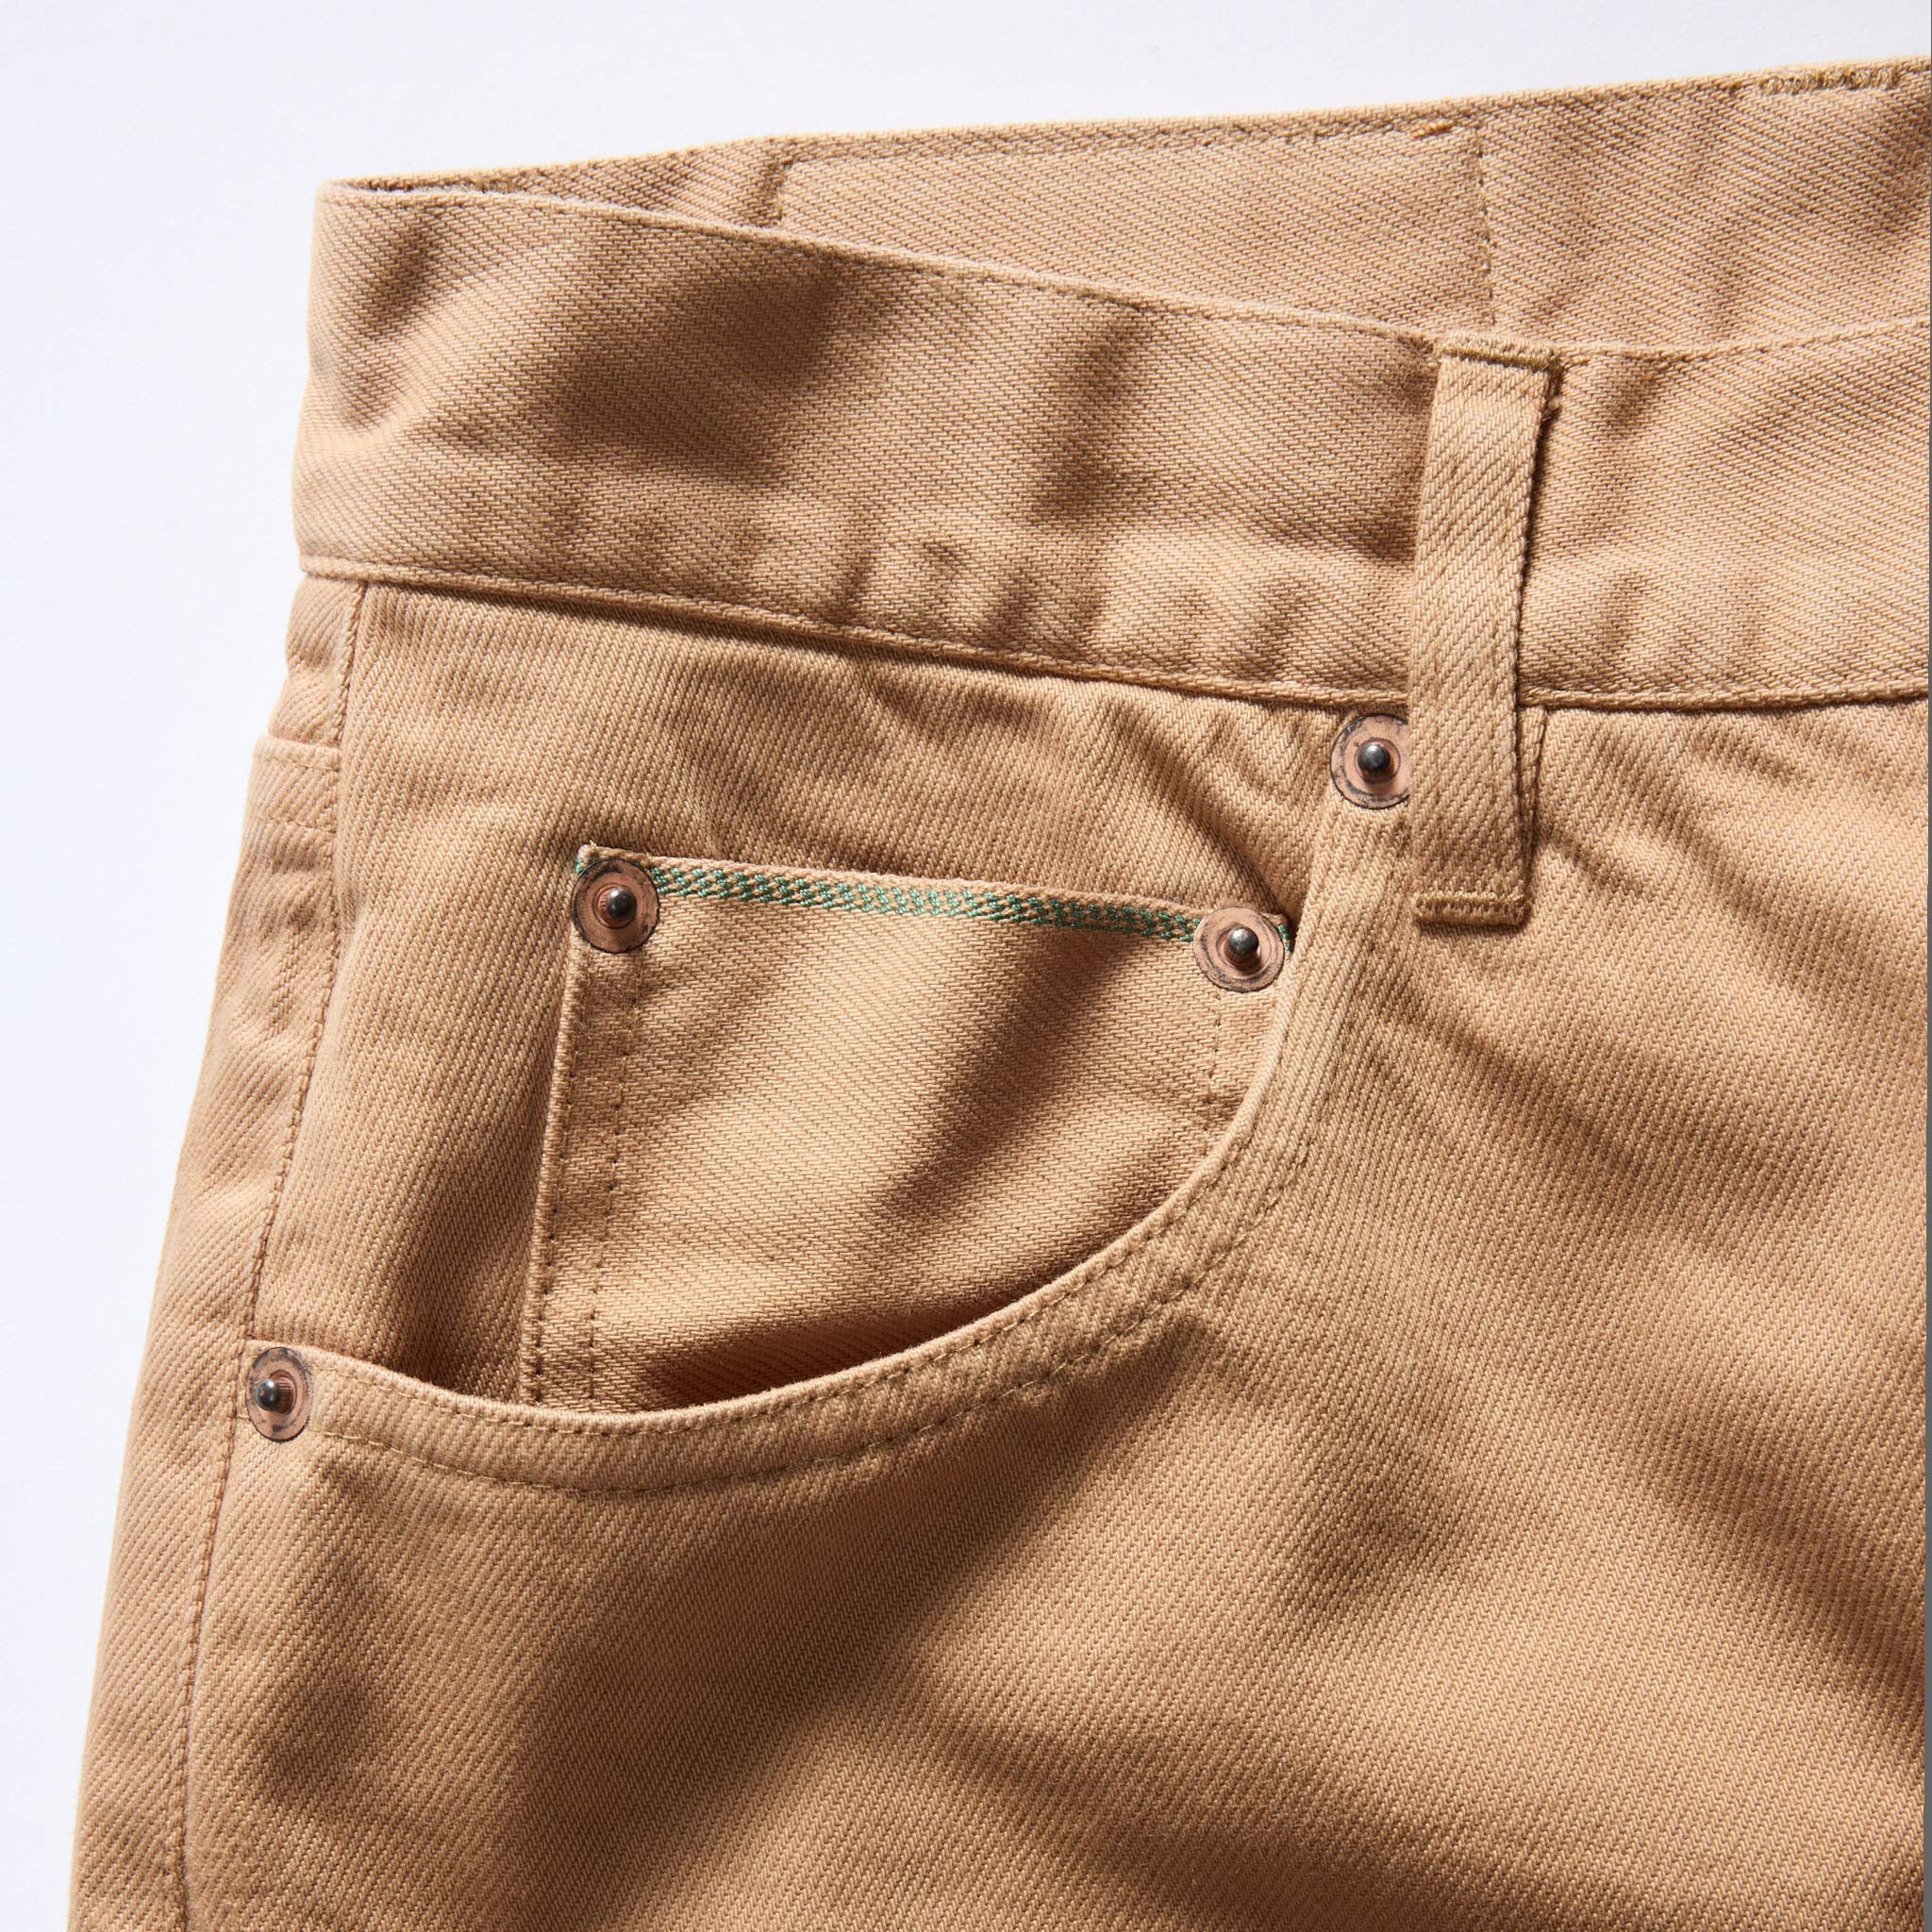 The Slim All Day Pant in Tobacco Selvage Denim